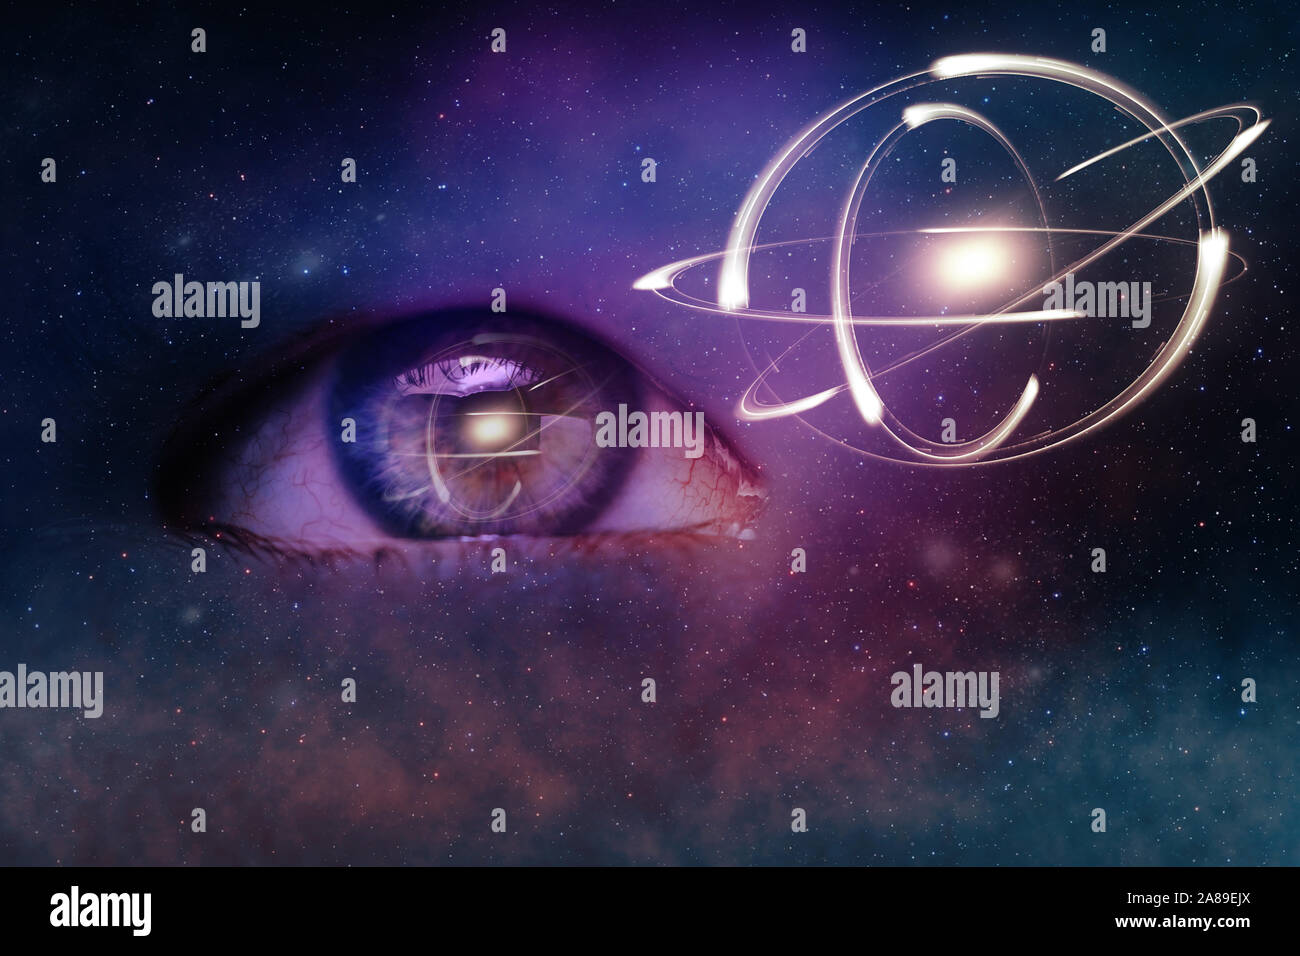 Close up Abstract eye concept looking on a atom. Nebula dust in infinite space backgroud. Mixed media. Stock Photo